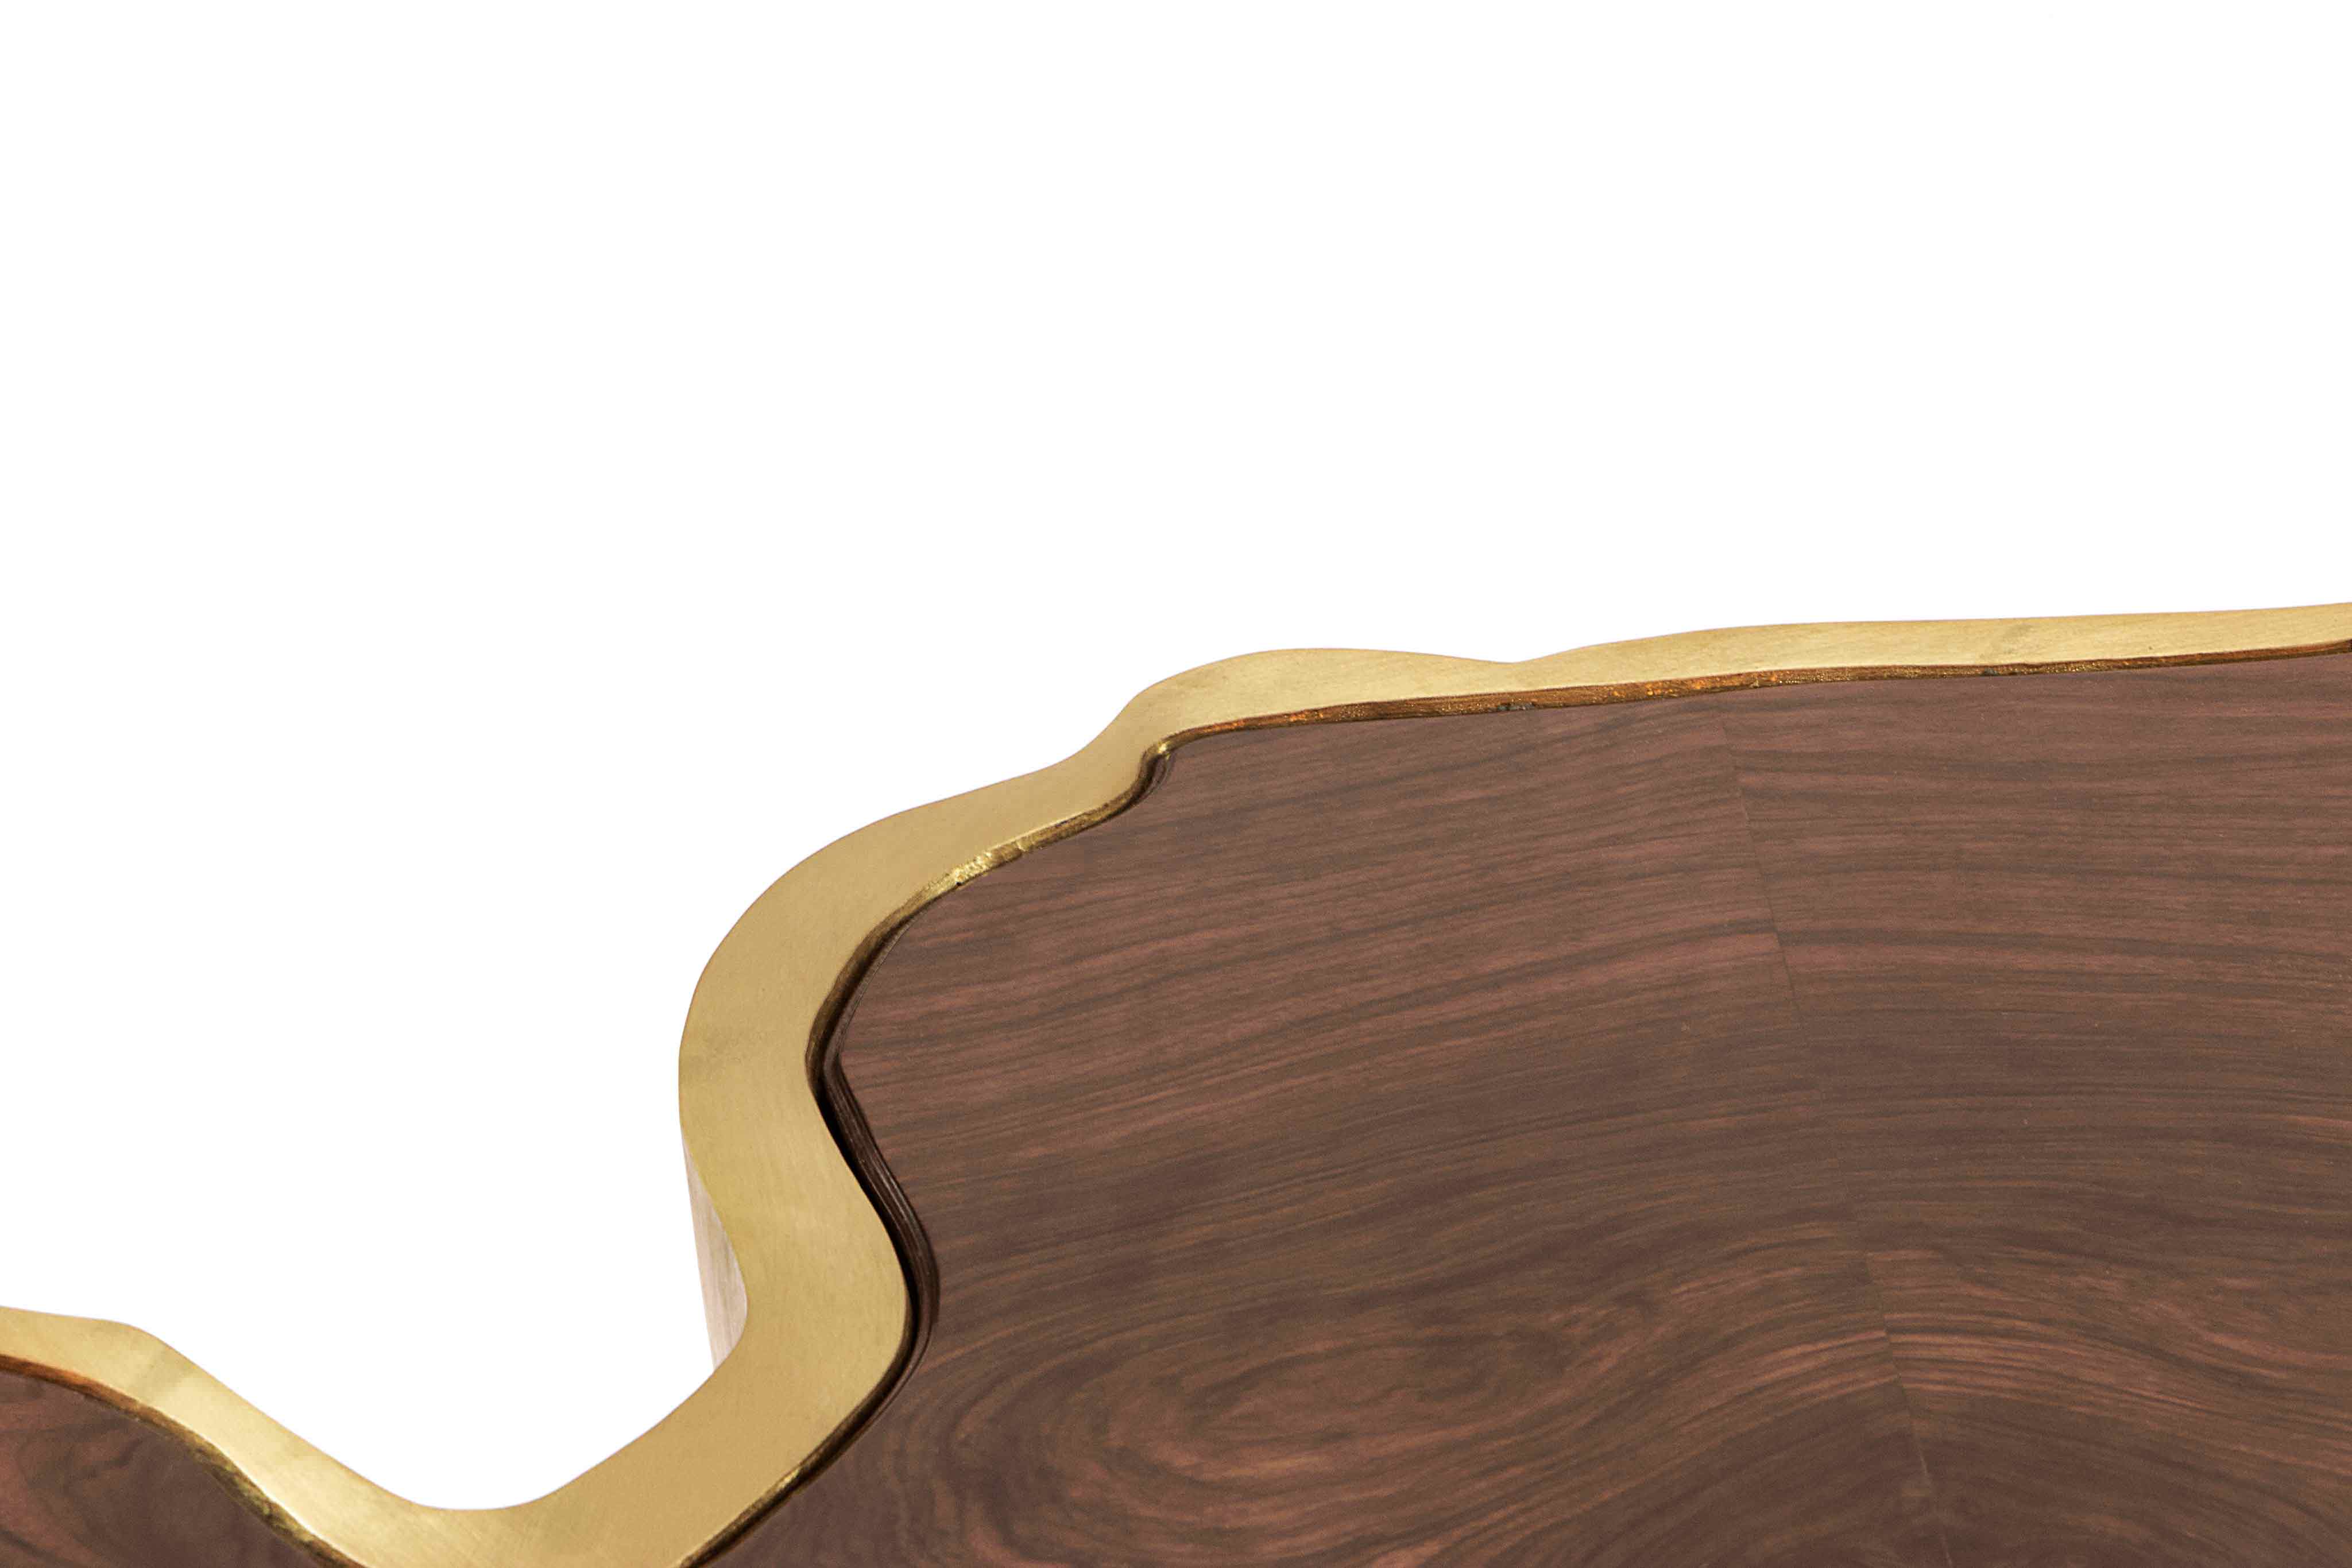 Handcrafted in exquisite materials, aged brass base with patina finish and top in a walnut root veneer. SEQUOIA is a nature force, an ancient spirit belonging to the largest (...)